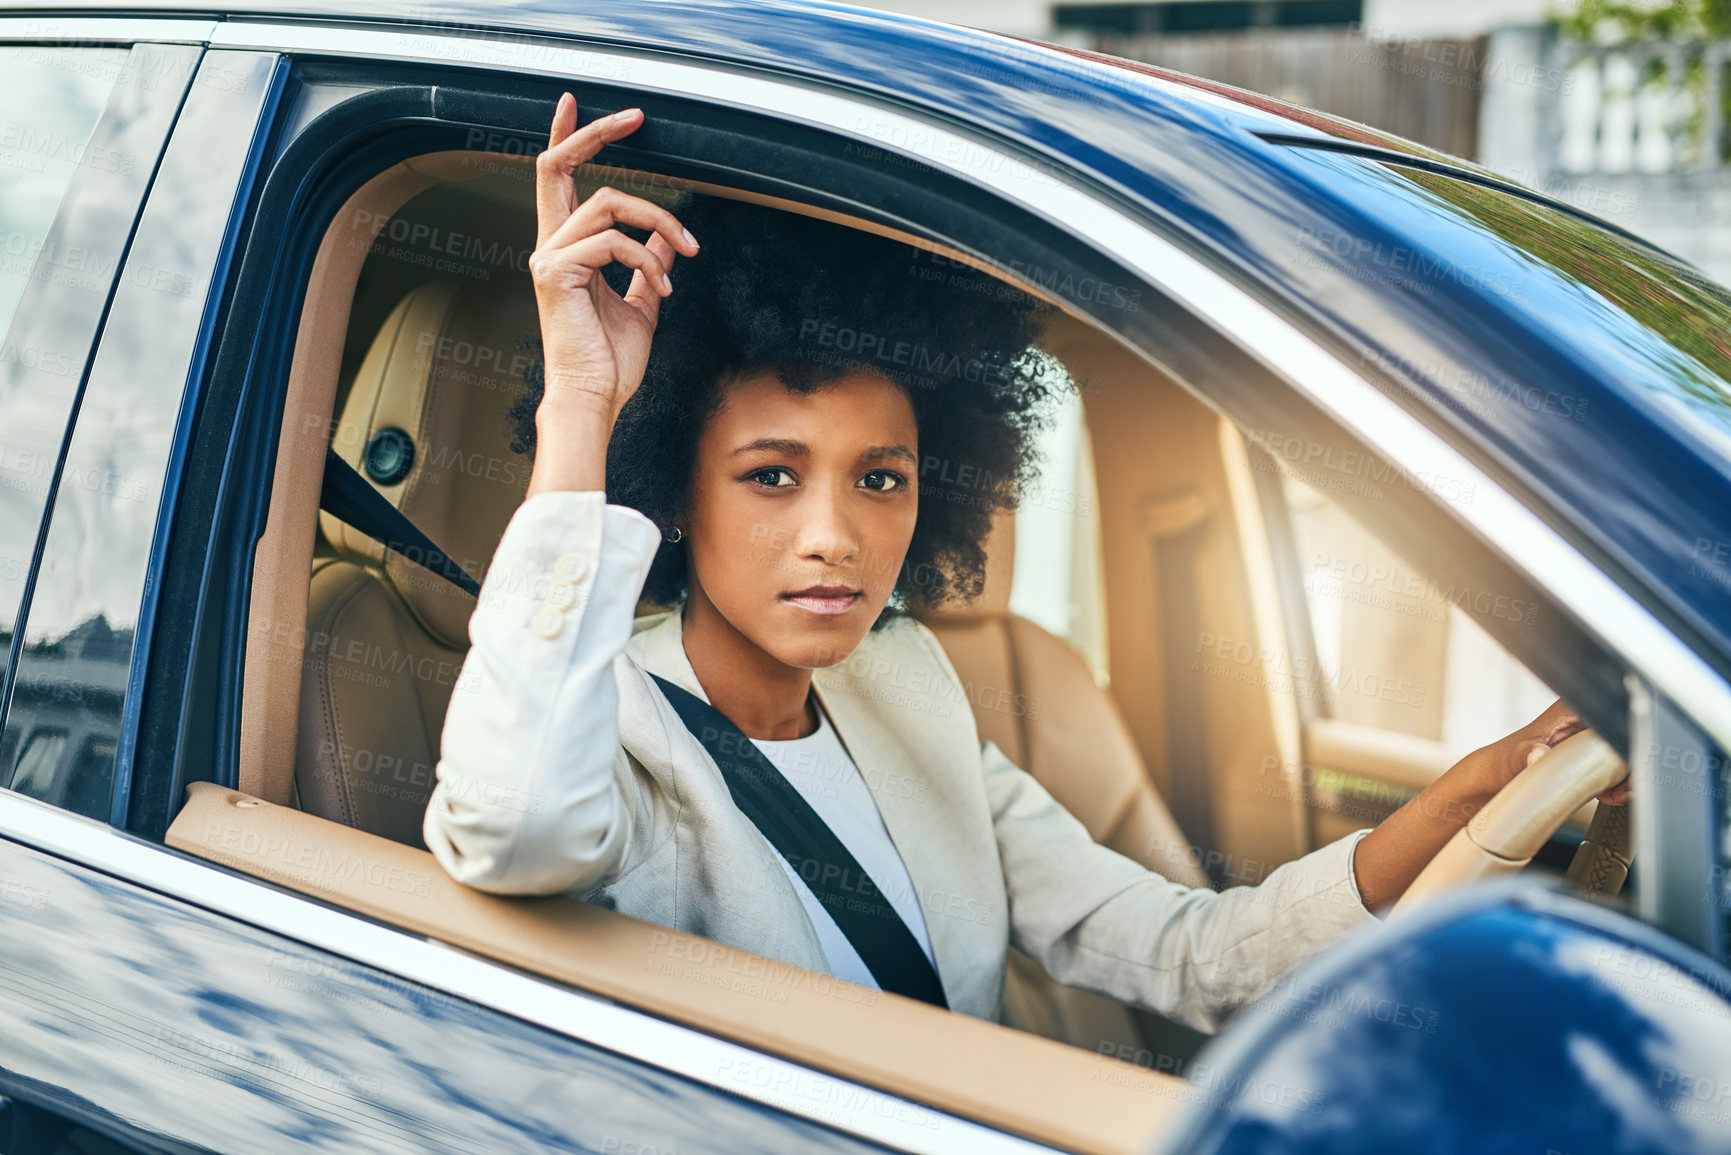 Buy stock photo Portrait of a confident young businesswoman on her way to work while driving in a car during the day